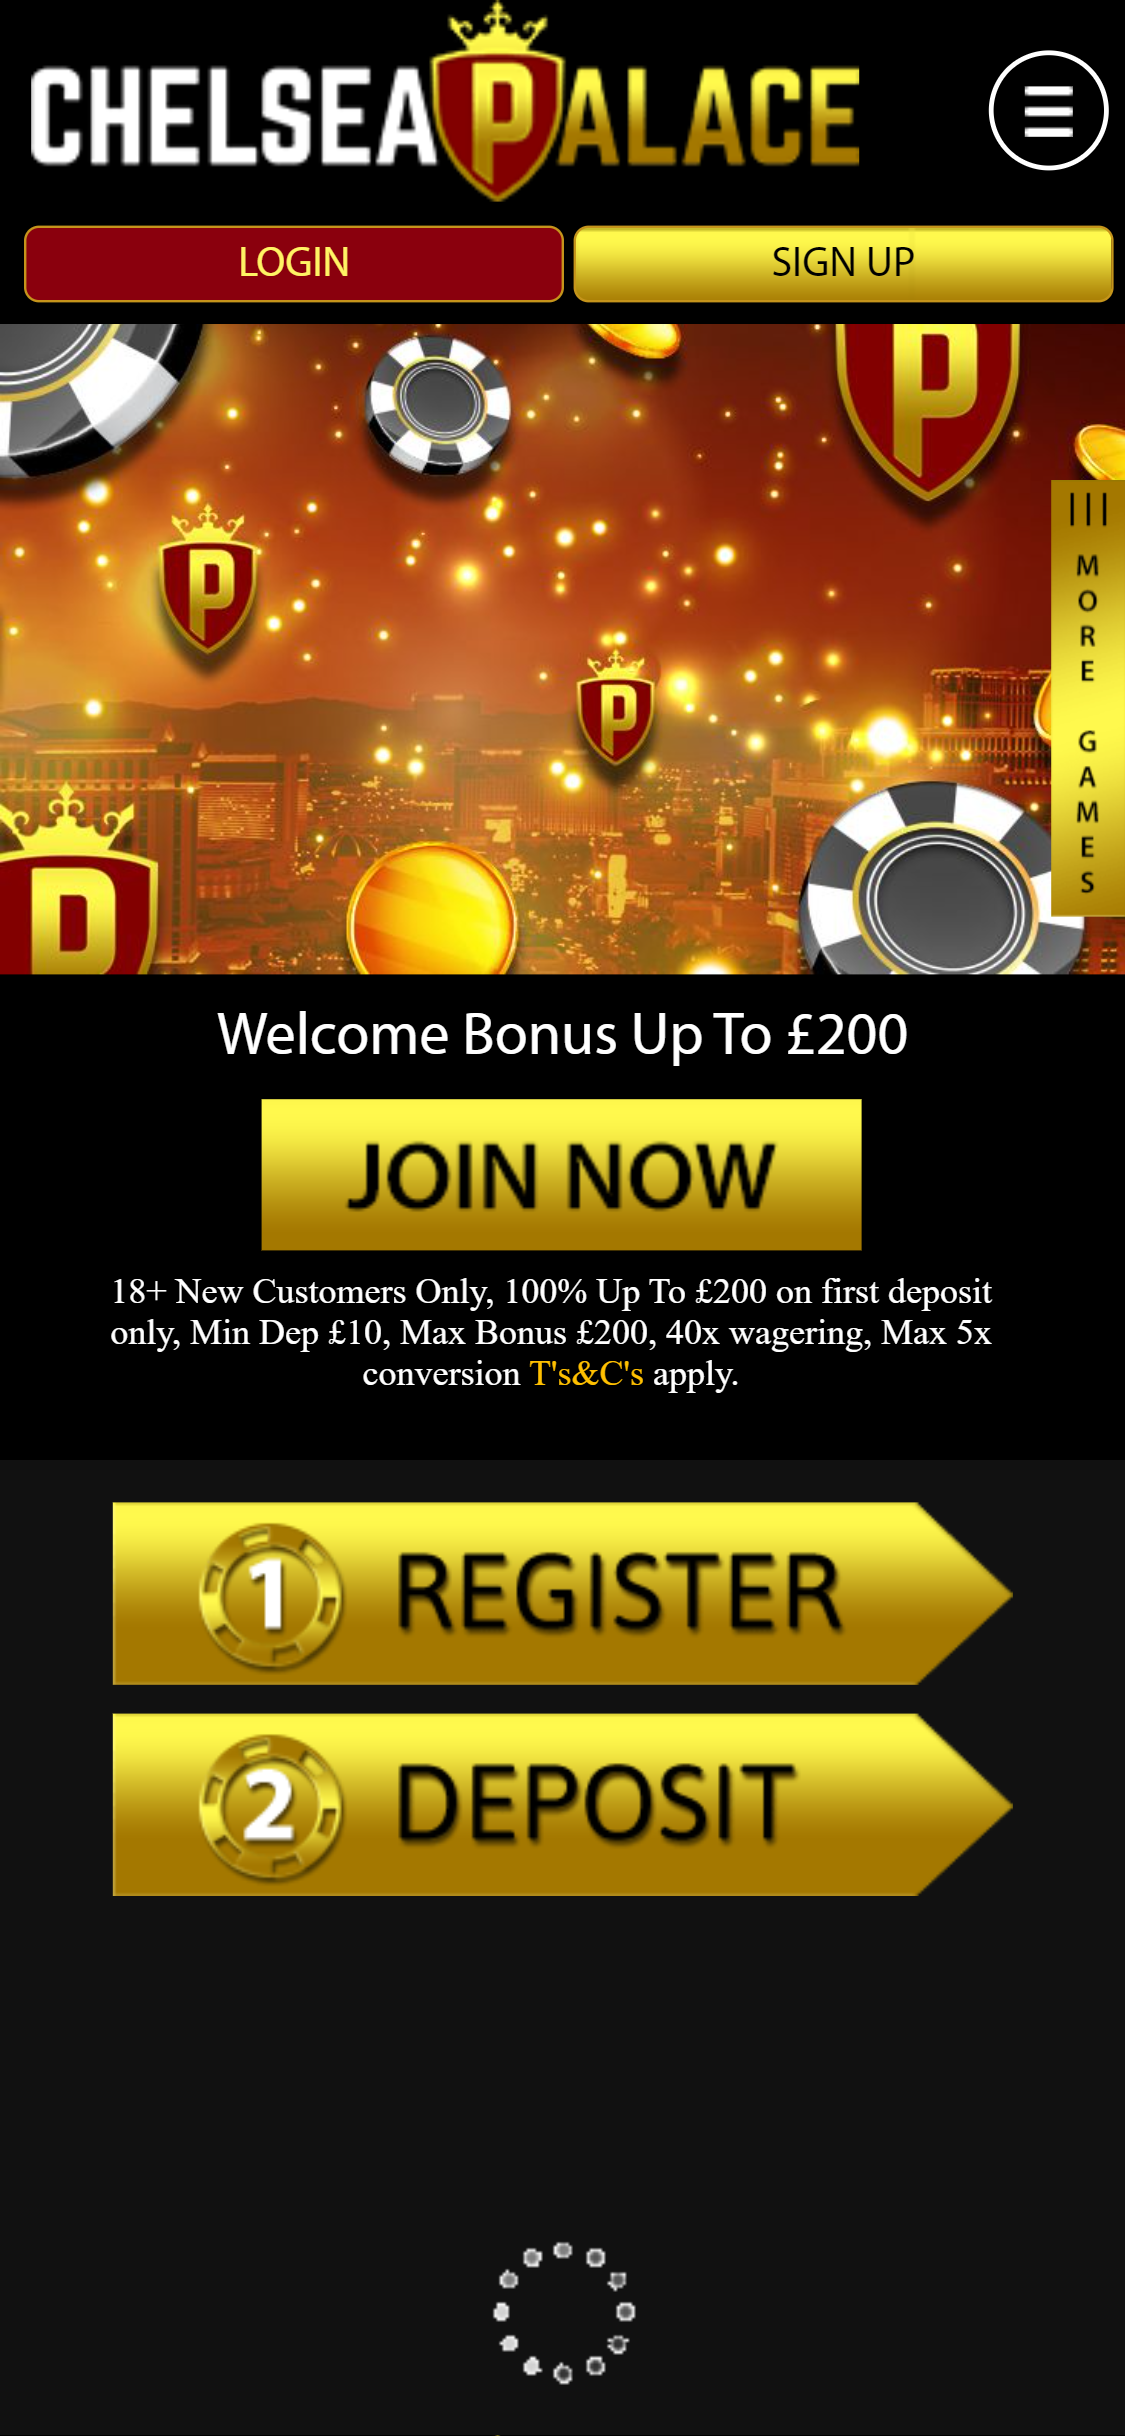 Chelsea Palace Casino Mobile Review